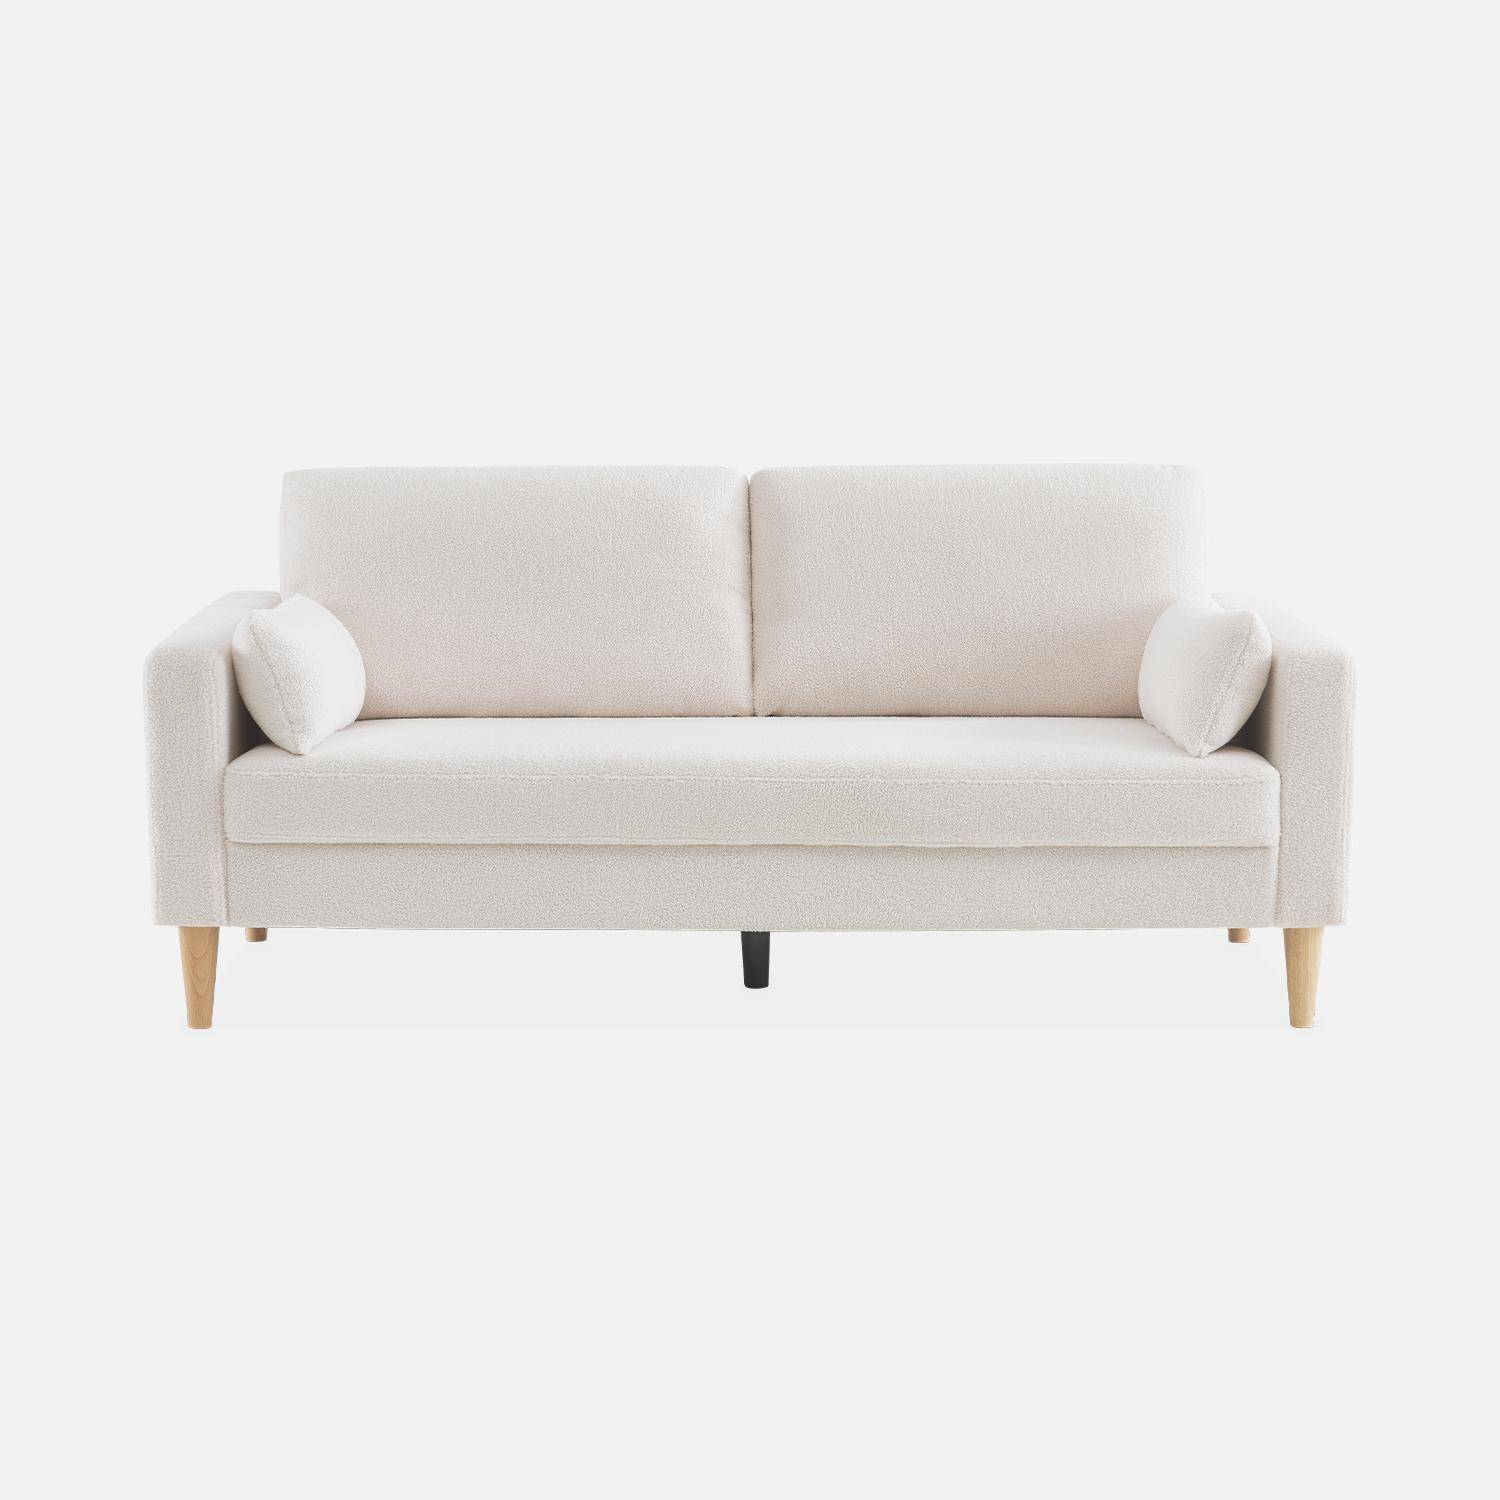 Large 3-seater sofa Scandi-style with wooden legs - Bjorn - white boucle Photo4